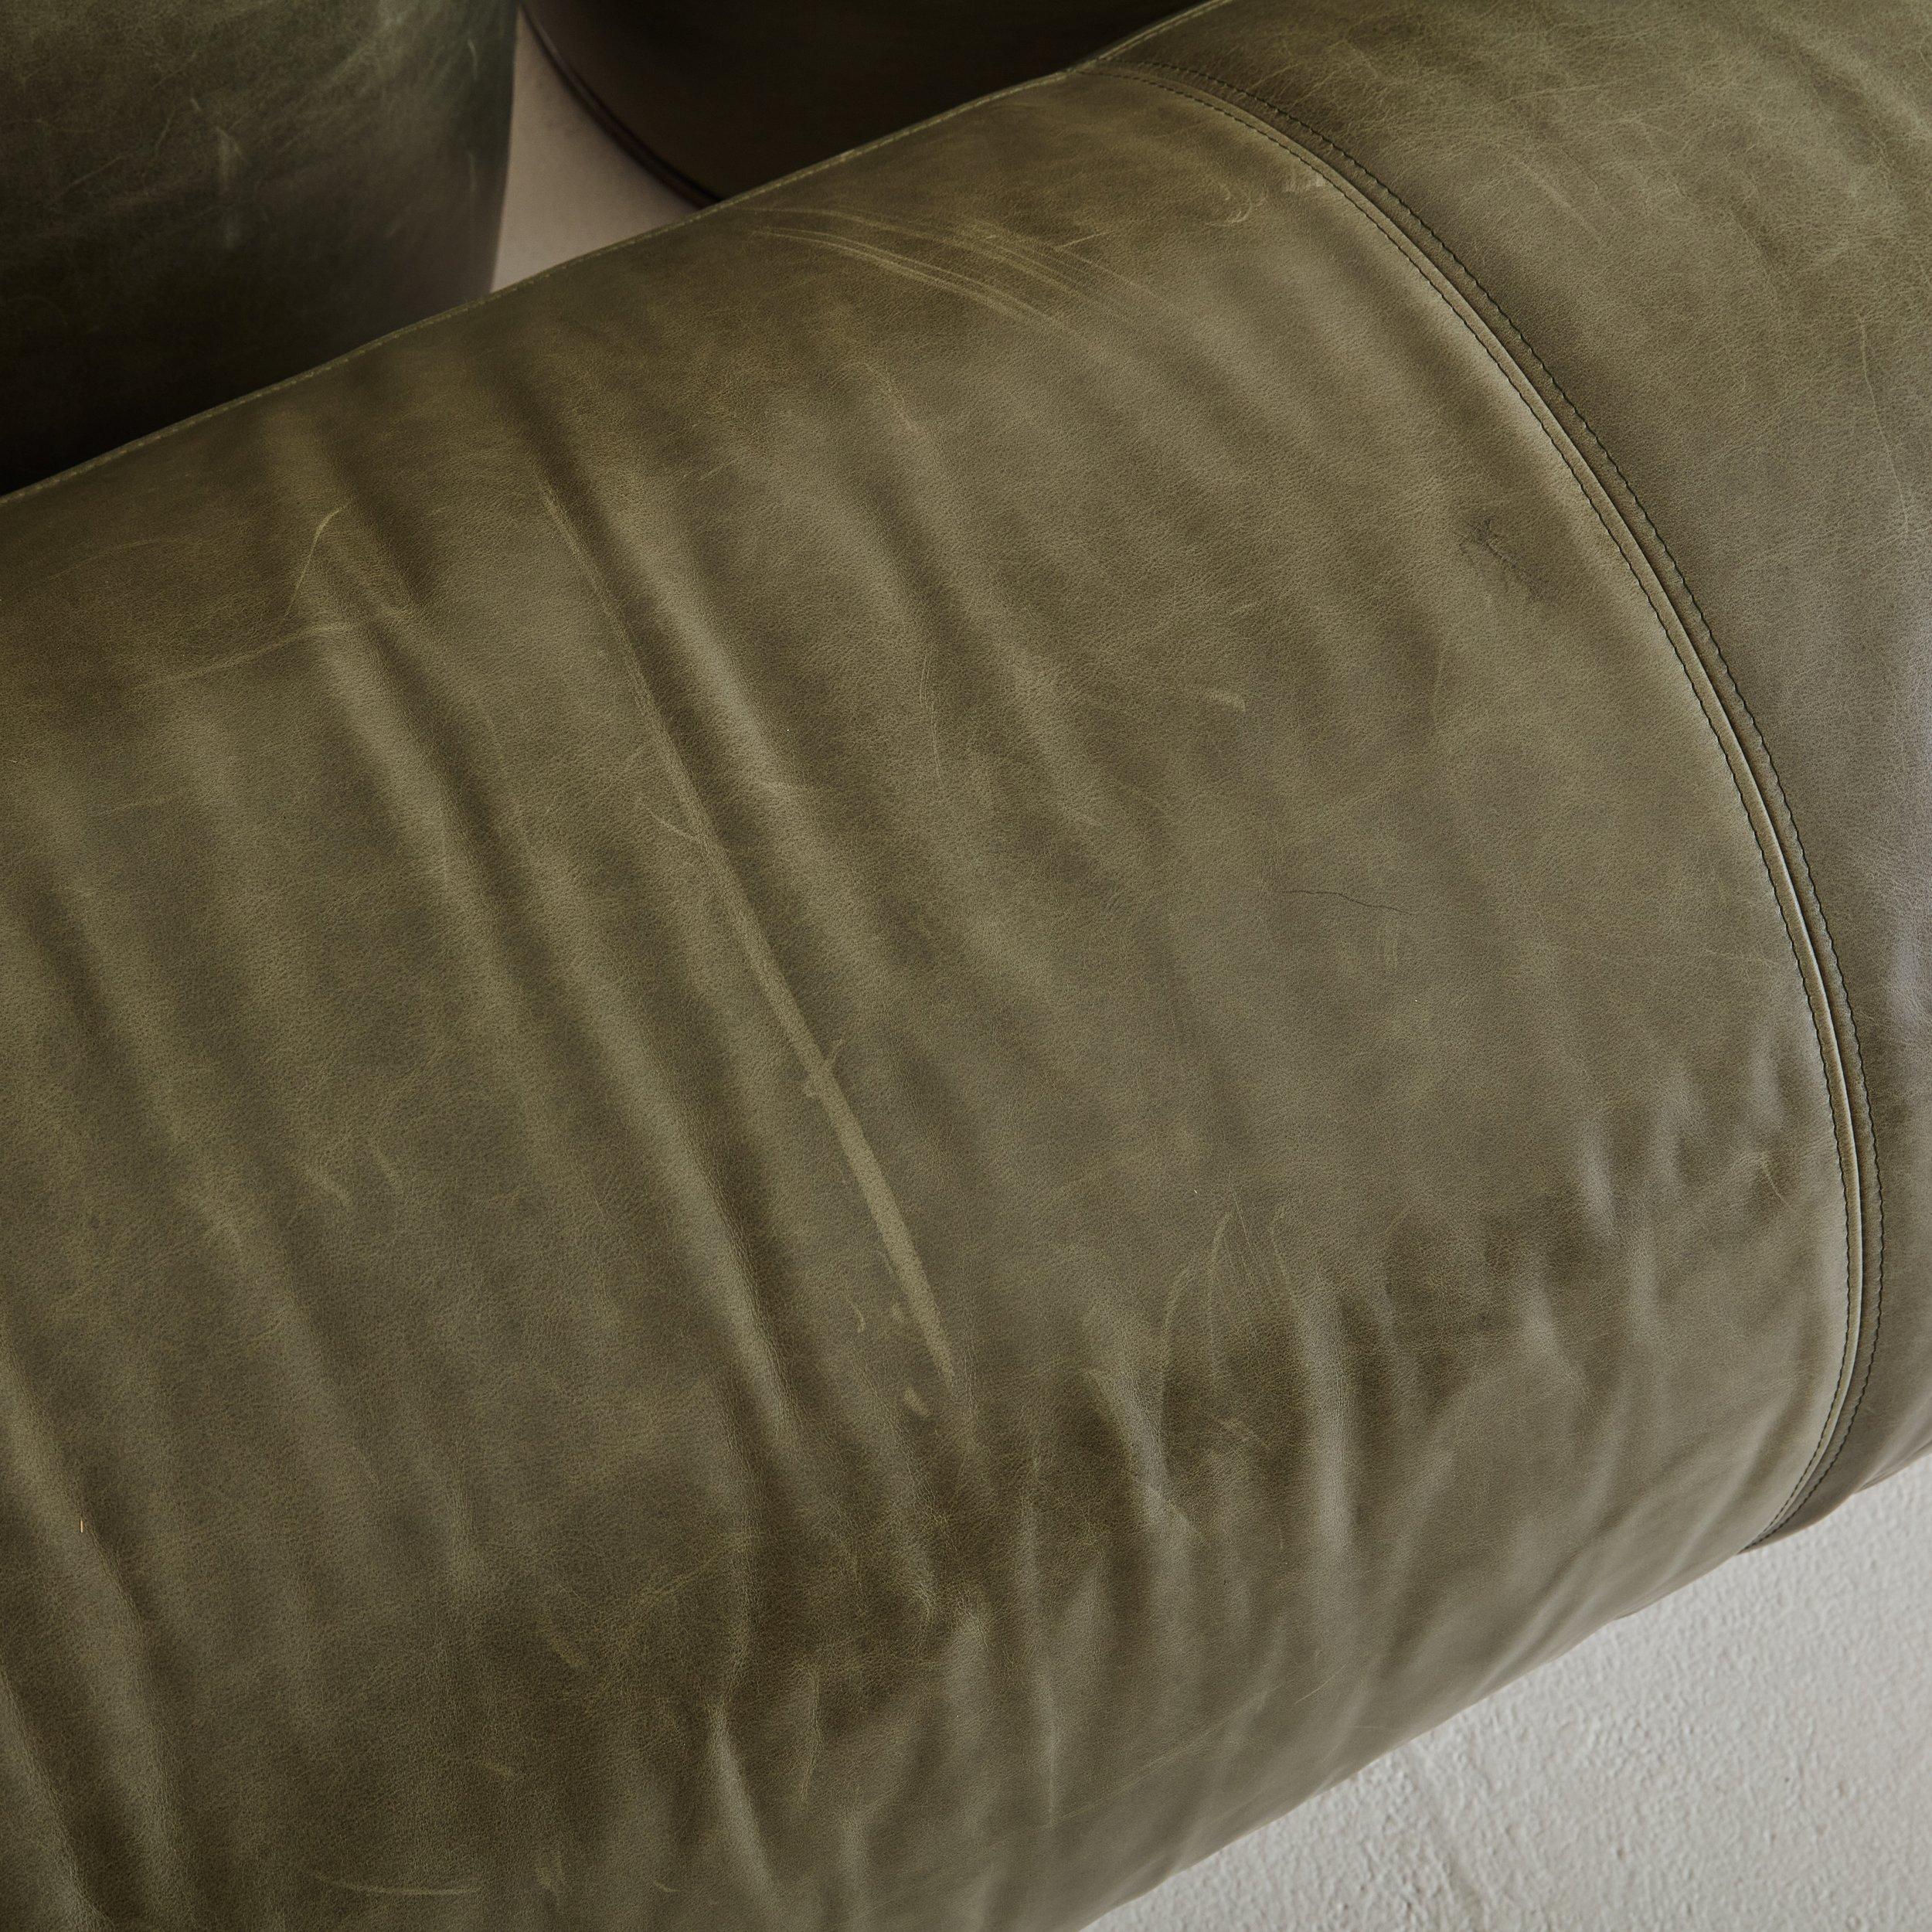 Late 20th Century Space Age 'Zeppelin' Sofa in Olive Green Leather by Walter Leeman for Velda For Sale